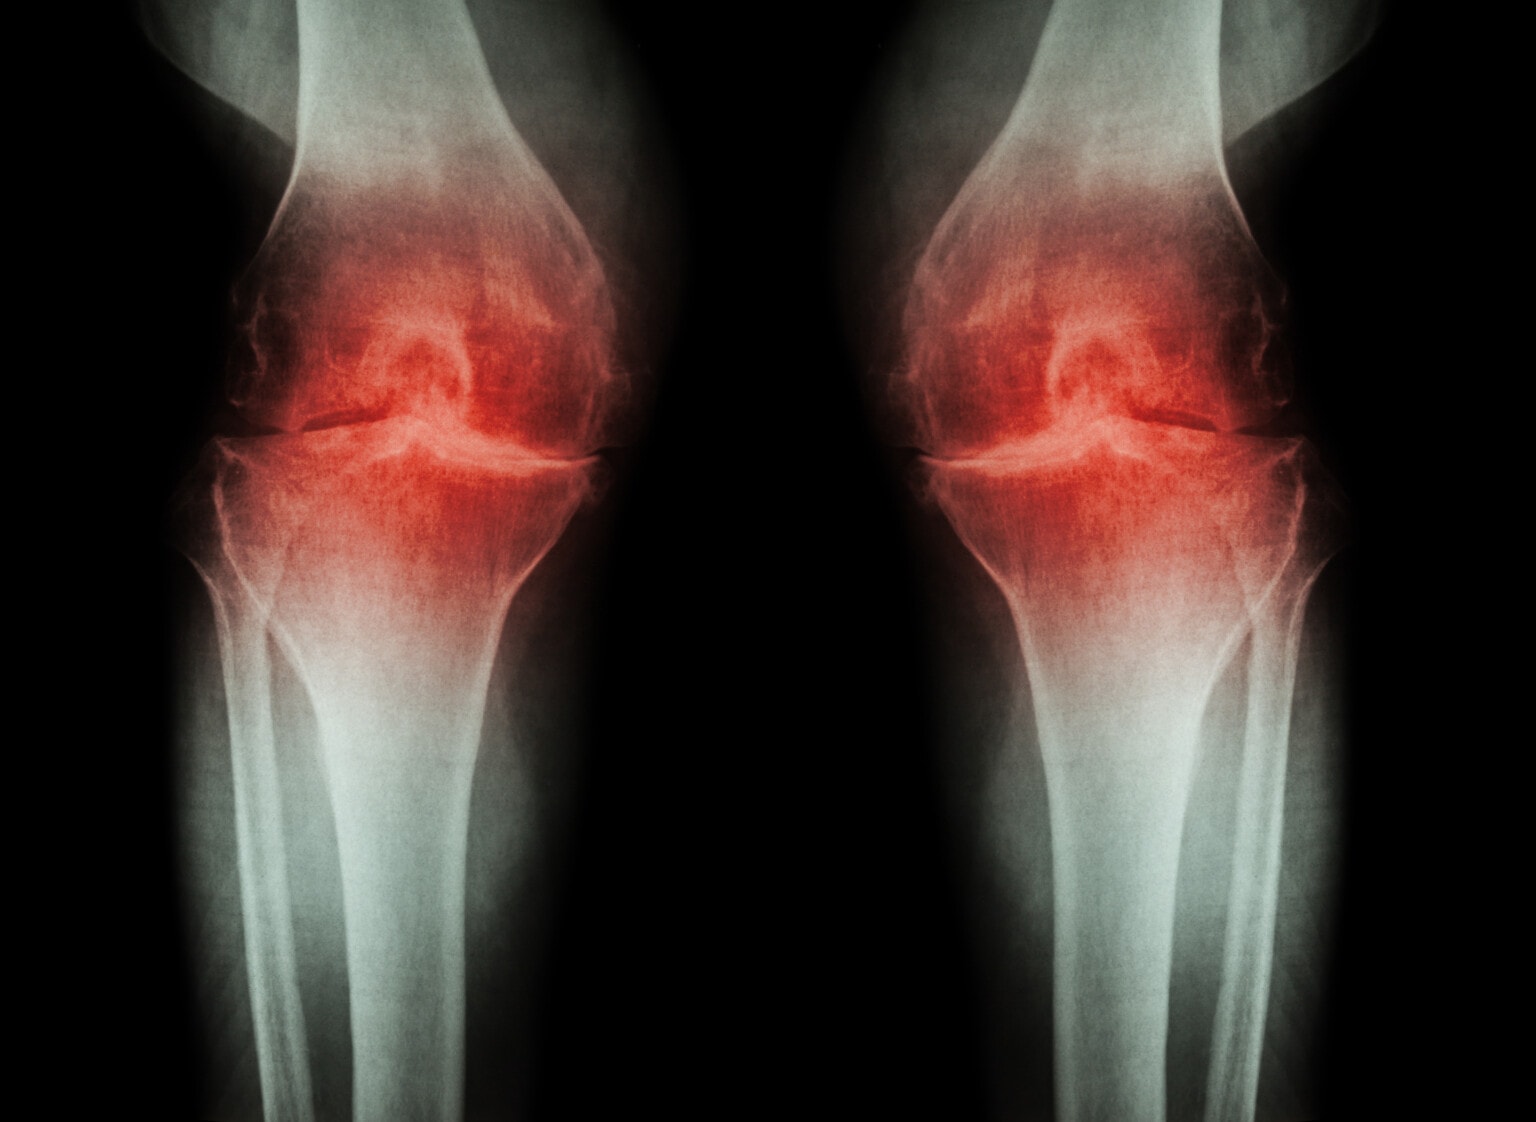 A Conflicted Sydney Scientist And A New Knee Arthritis Stem Cell Study